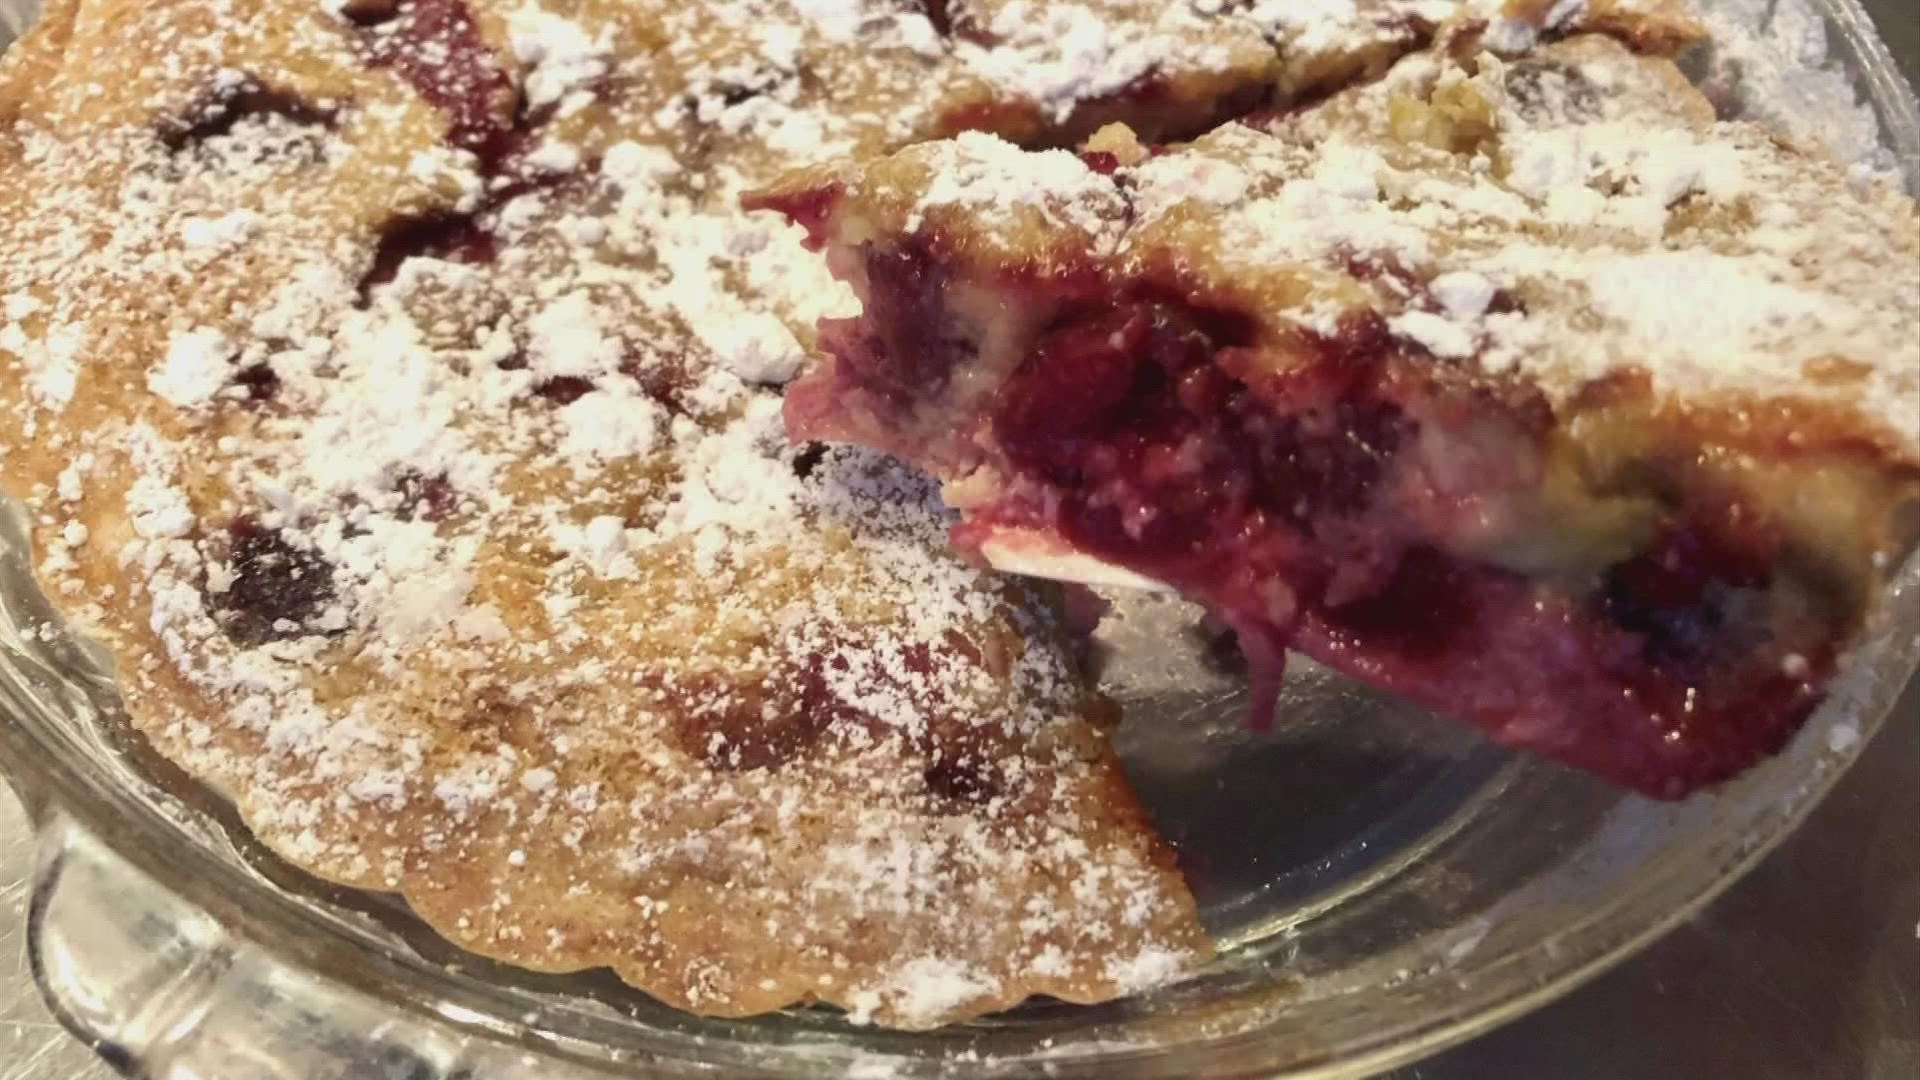 Brittany makes a cherry clafoutis to celebrate World Plant Milk Day.